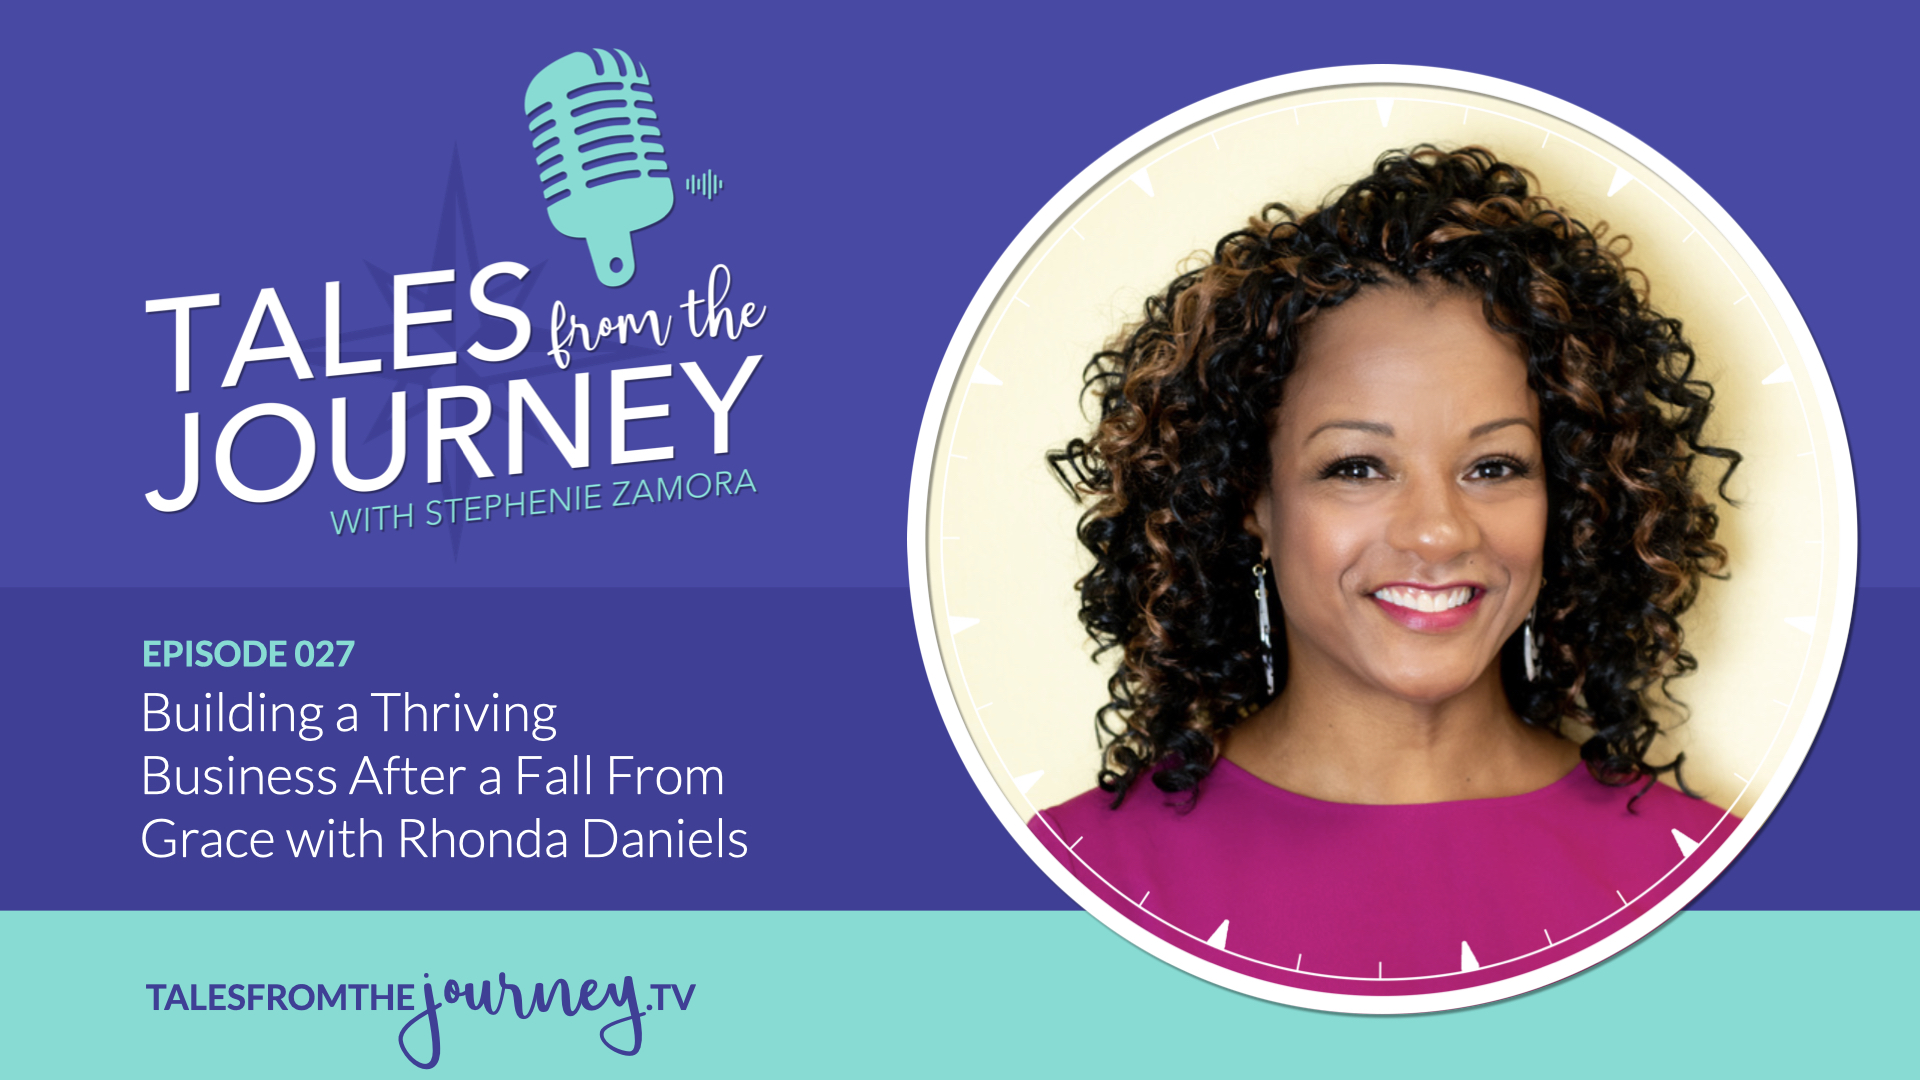 Building a Thriving Business After a Fall From Grace with Rhonda Daniels